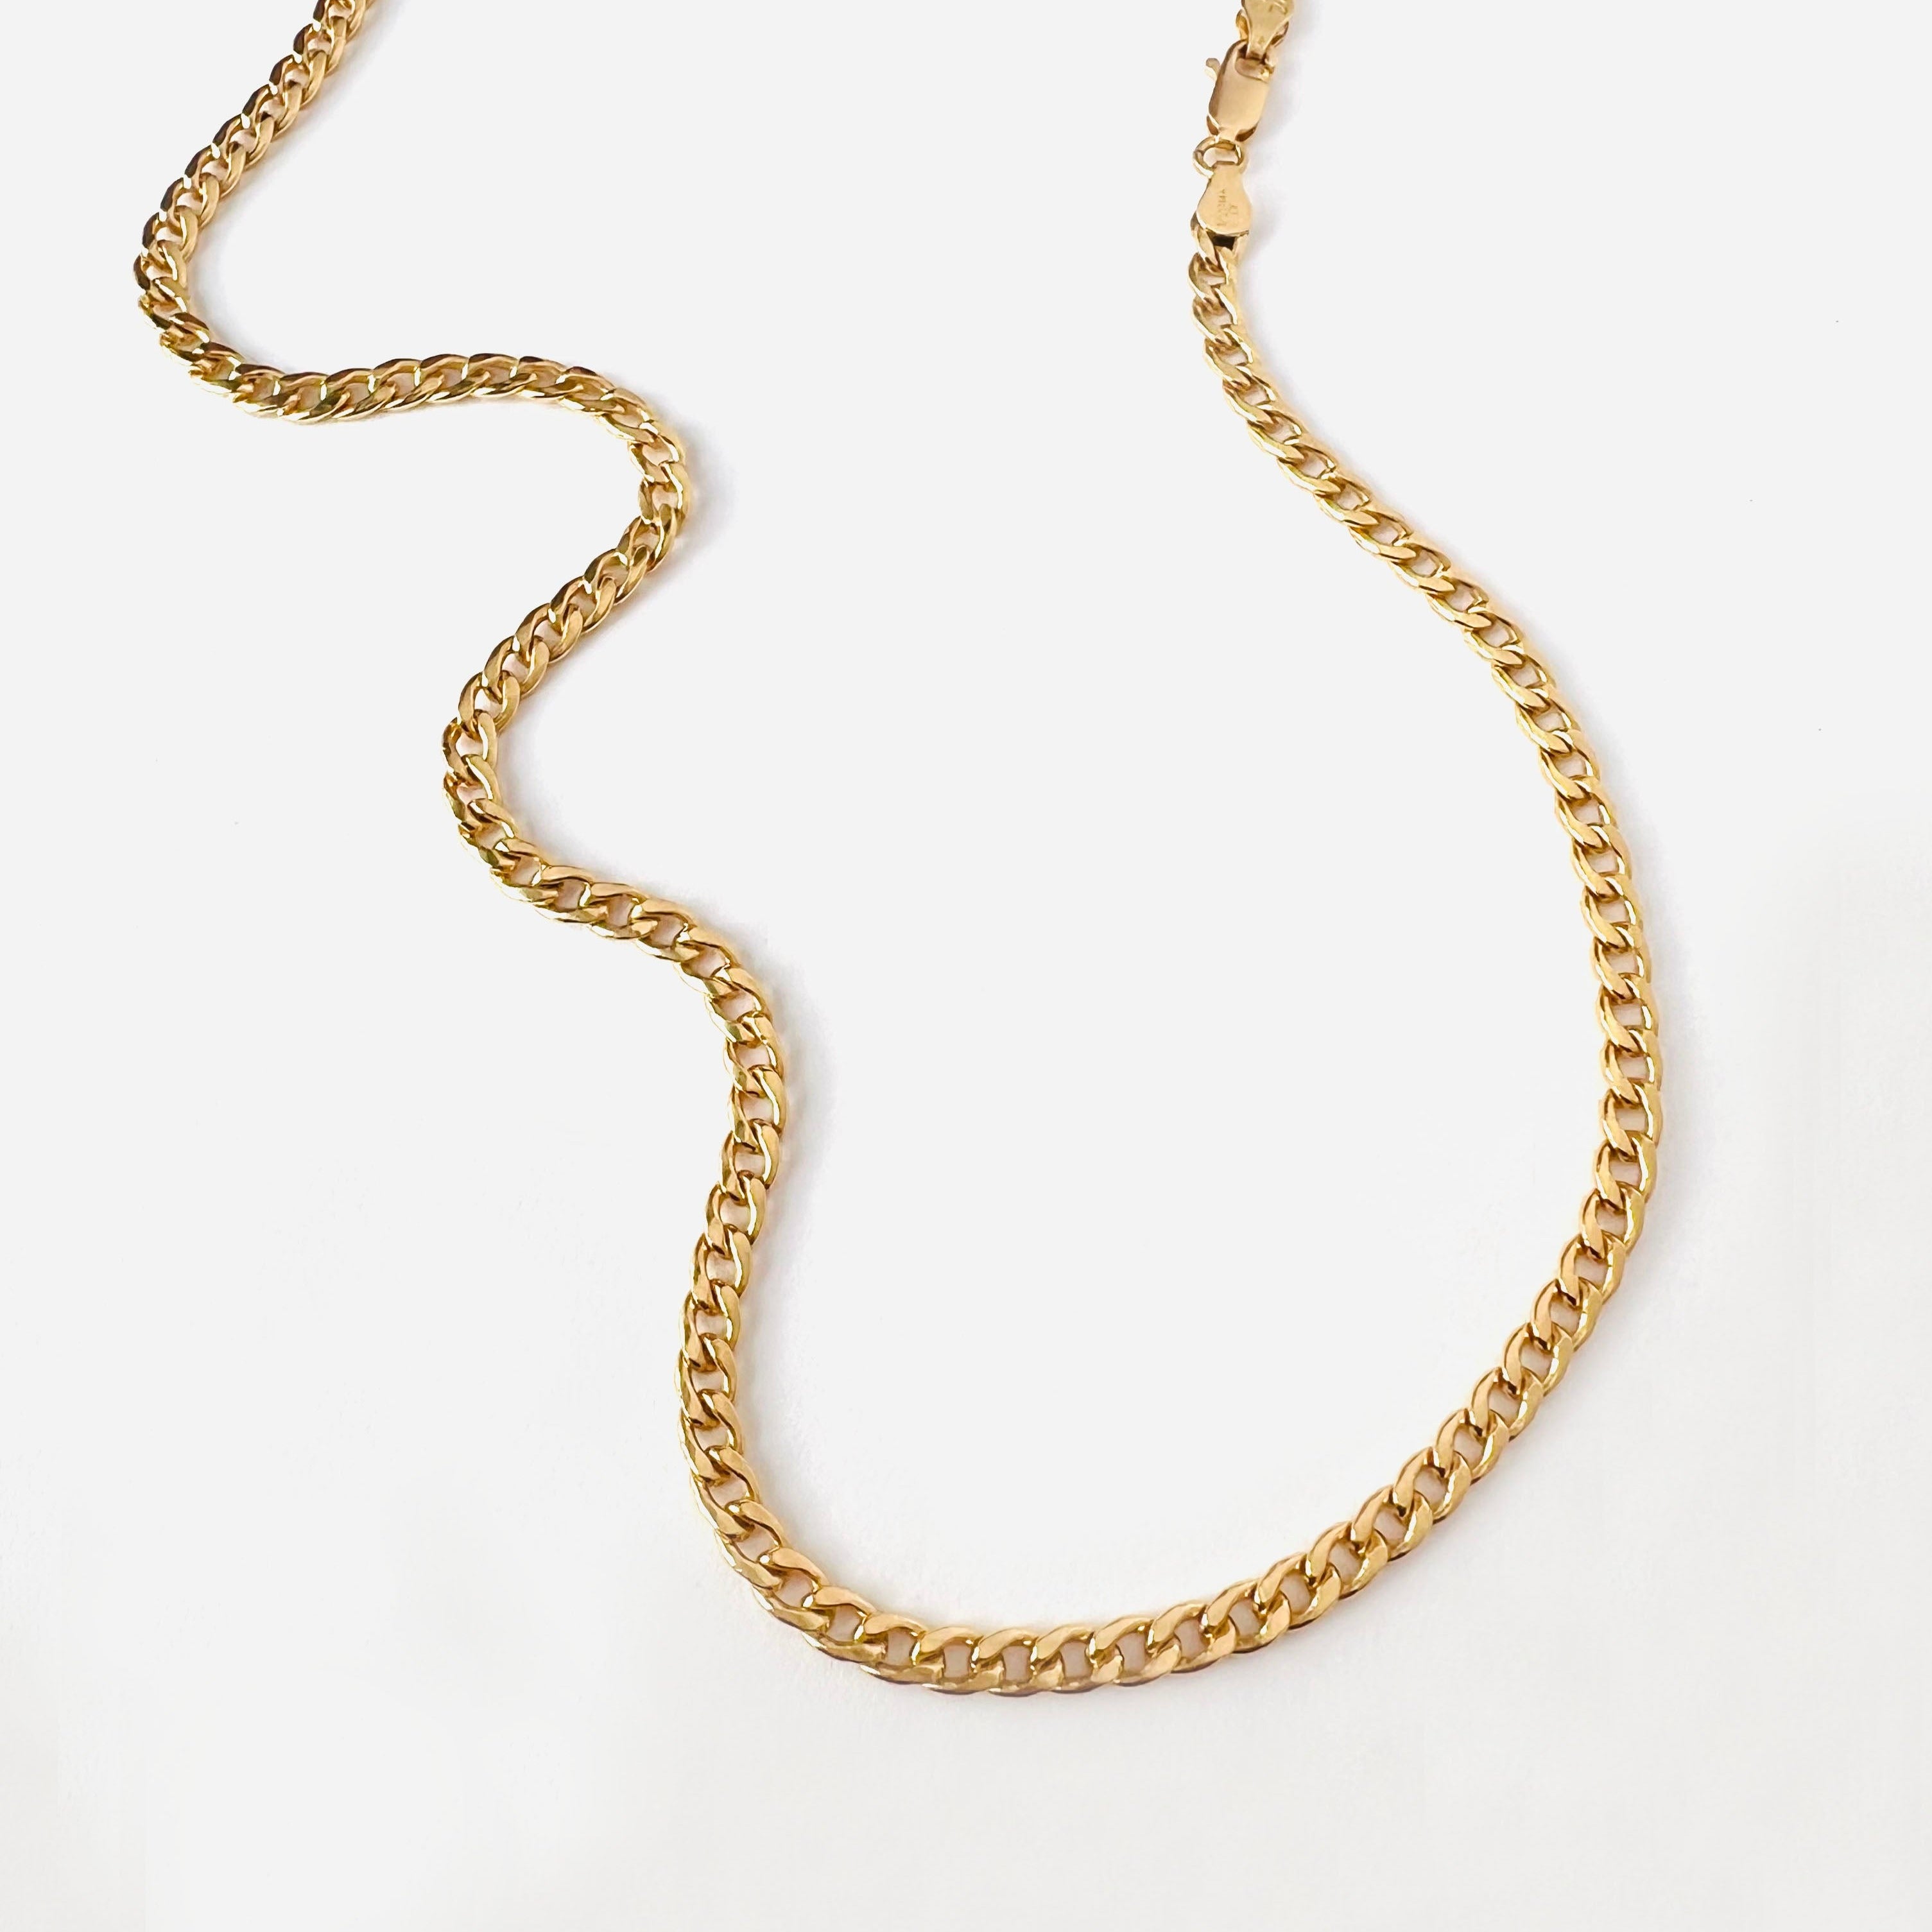 Gold Curb Chain made with recycled gold